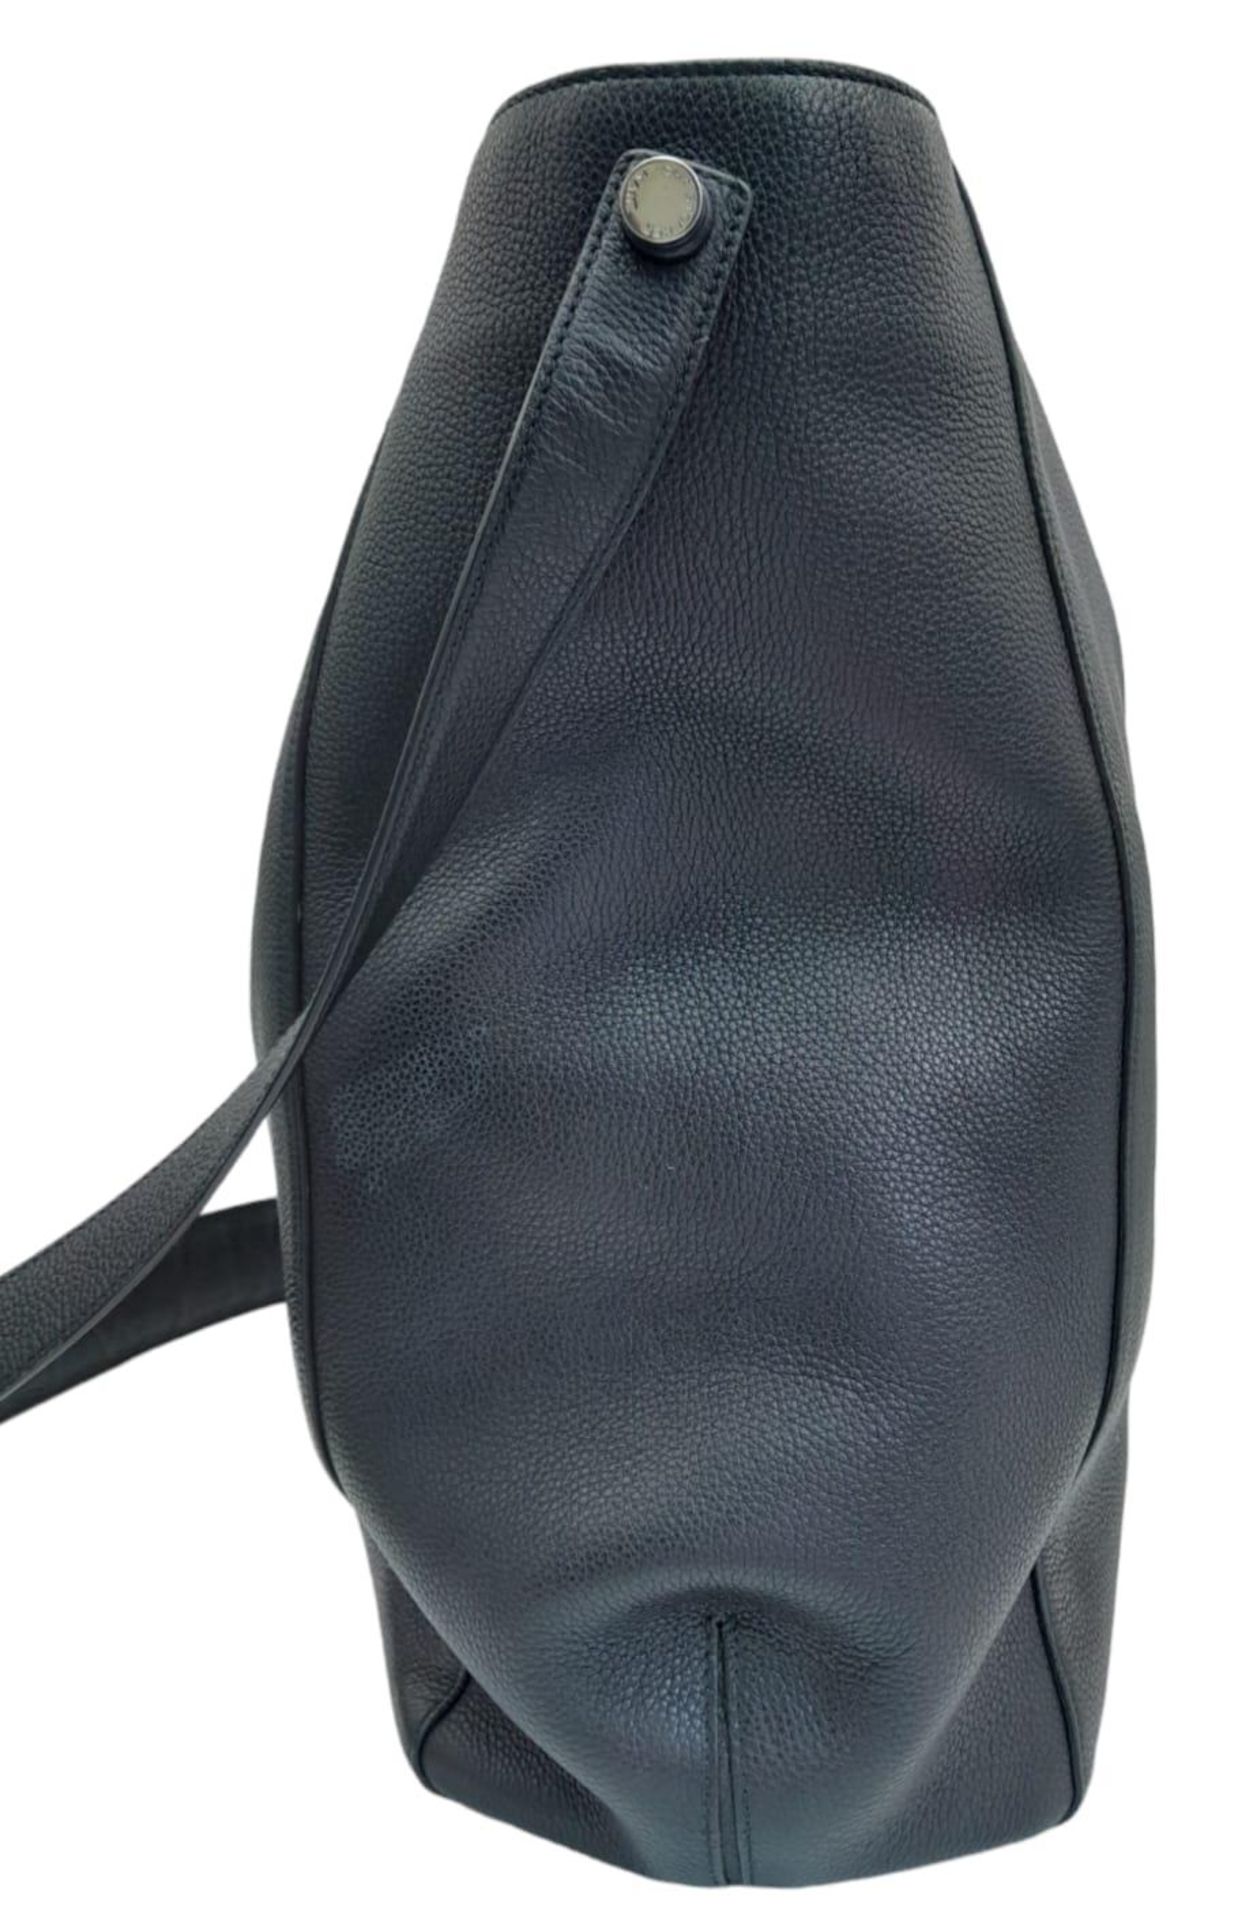 A Christopher Kane Black Tote Bag. Leather exterior with silver-toned hardware, two top handles, - Image 2 of 7